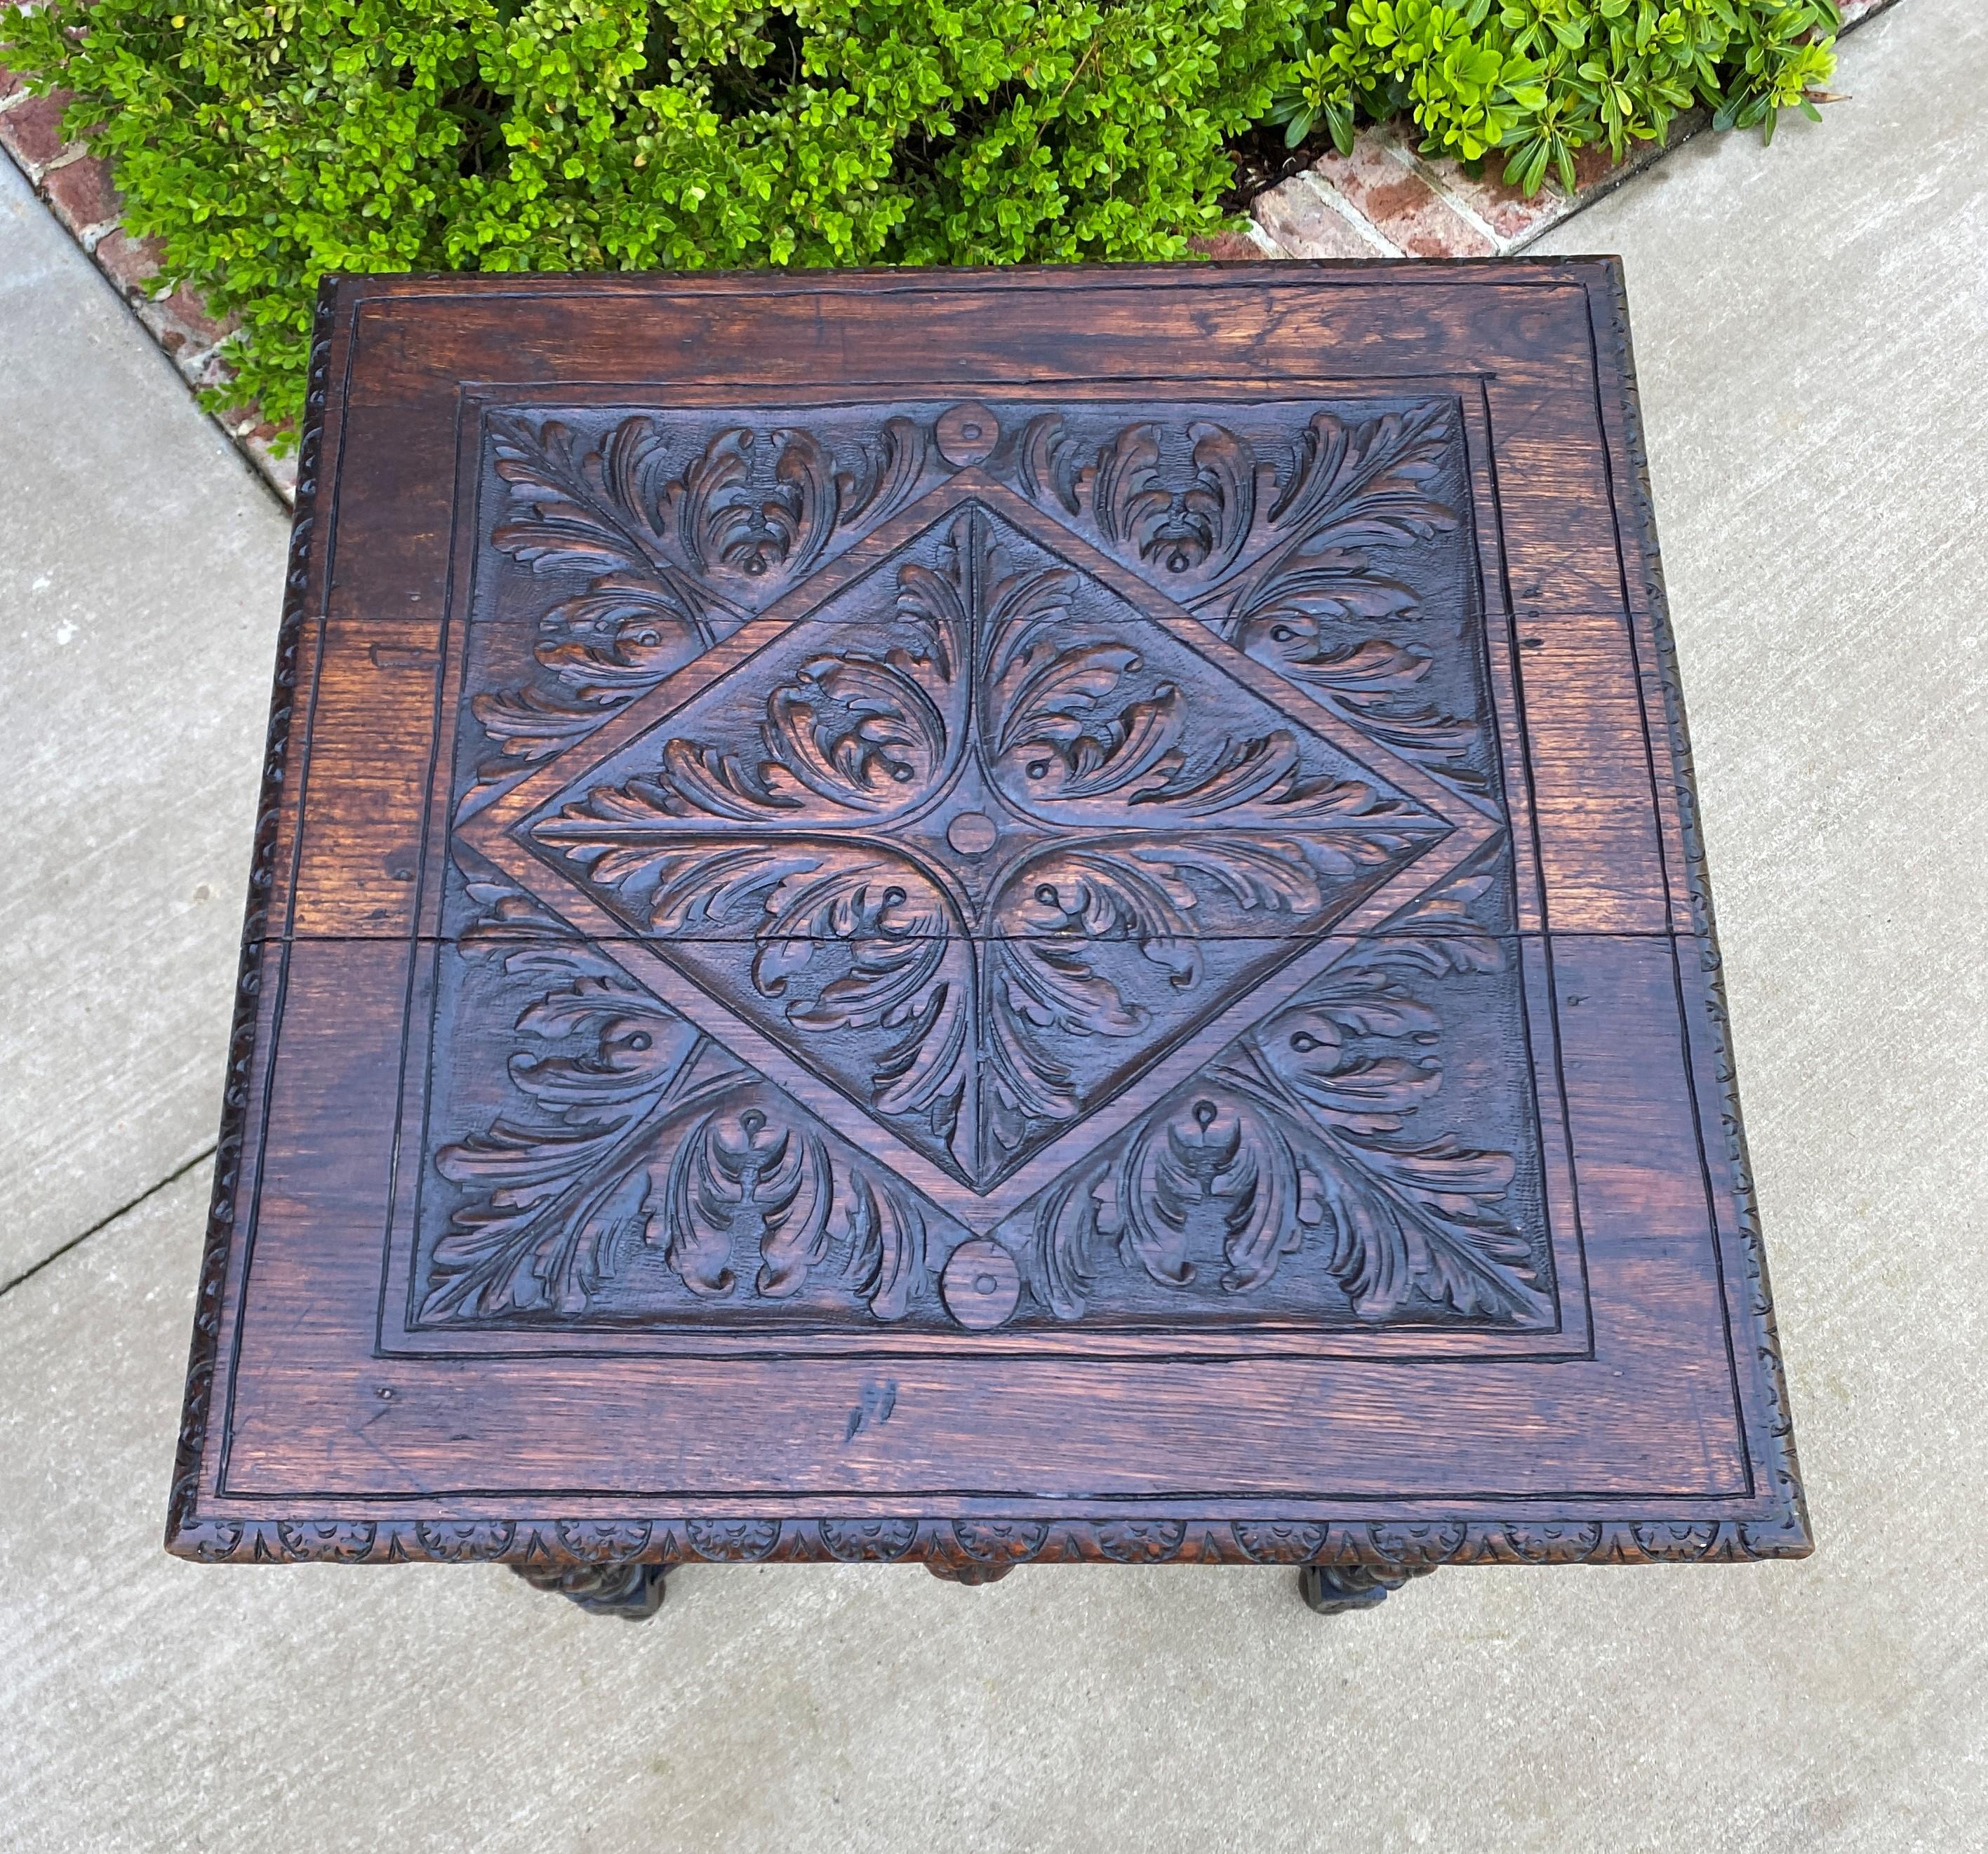 EXQUISITELY CARVED Antique French Oak SQUARE Entry, Library, Hall, Side or End Table with Drawer ~~c. 1880s

Charming Renaissance Revival table with drawer~~carved top with mask pull~~carved on all 4 sides and lower X-shaped stretcher~~perfect for